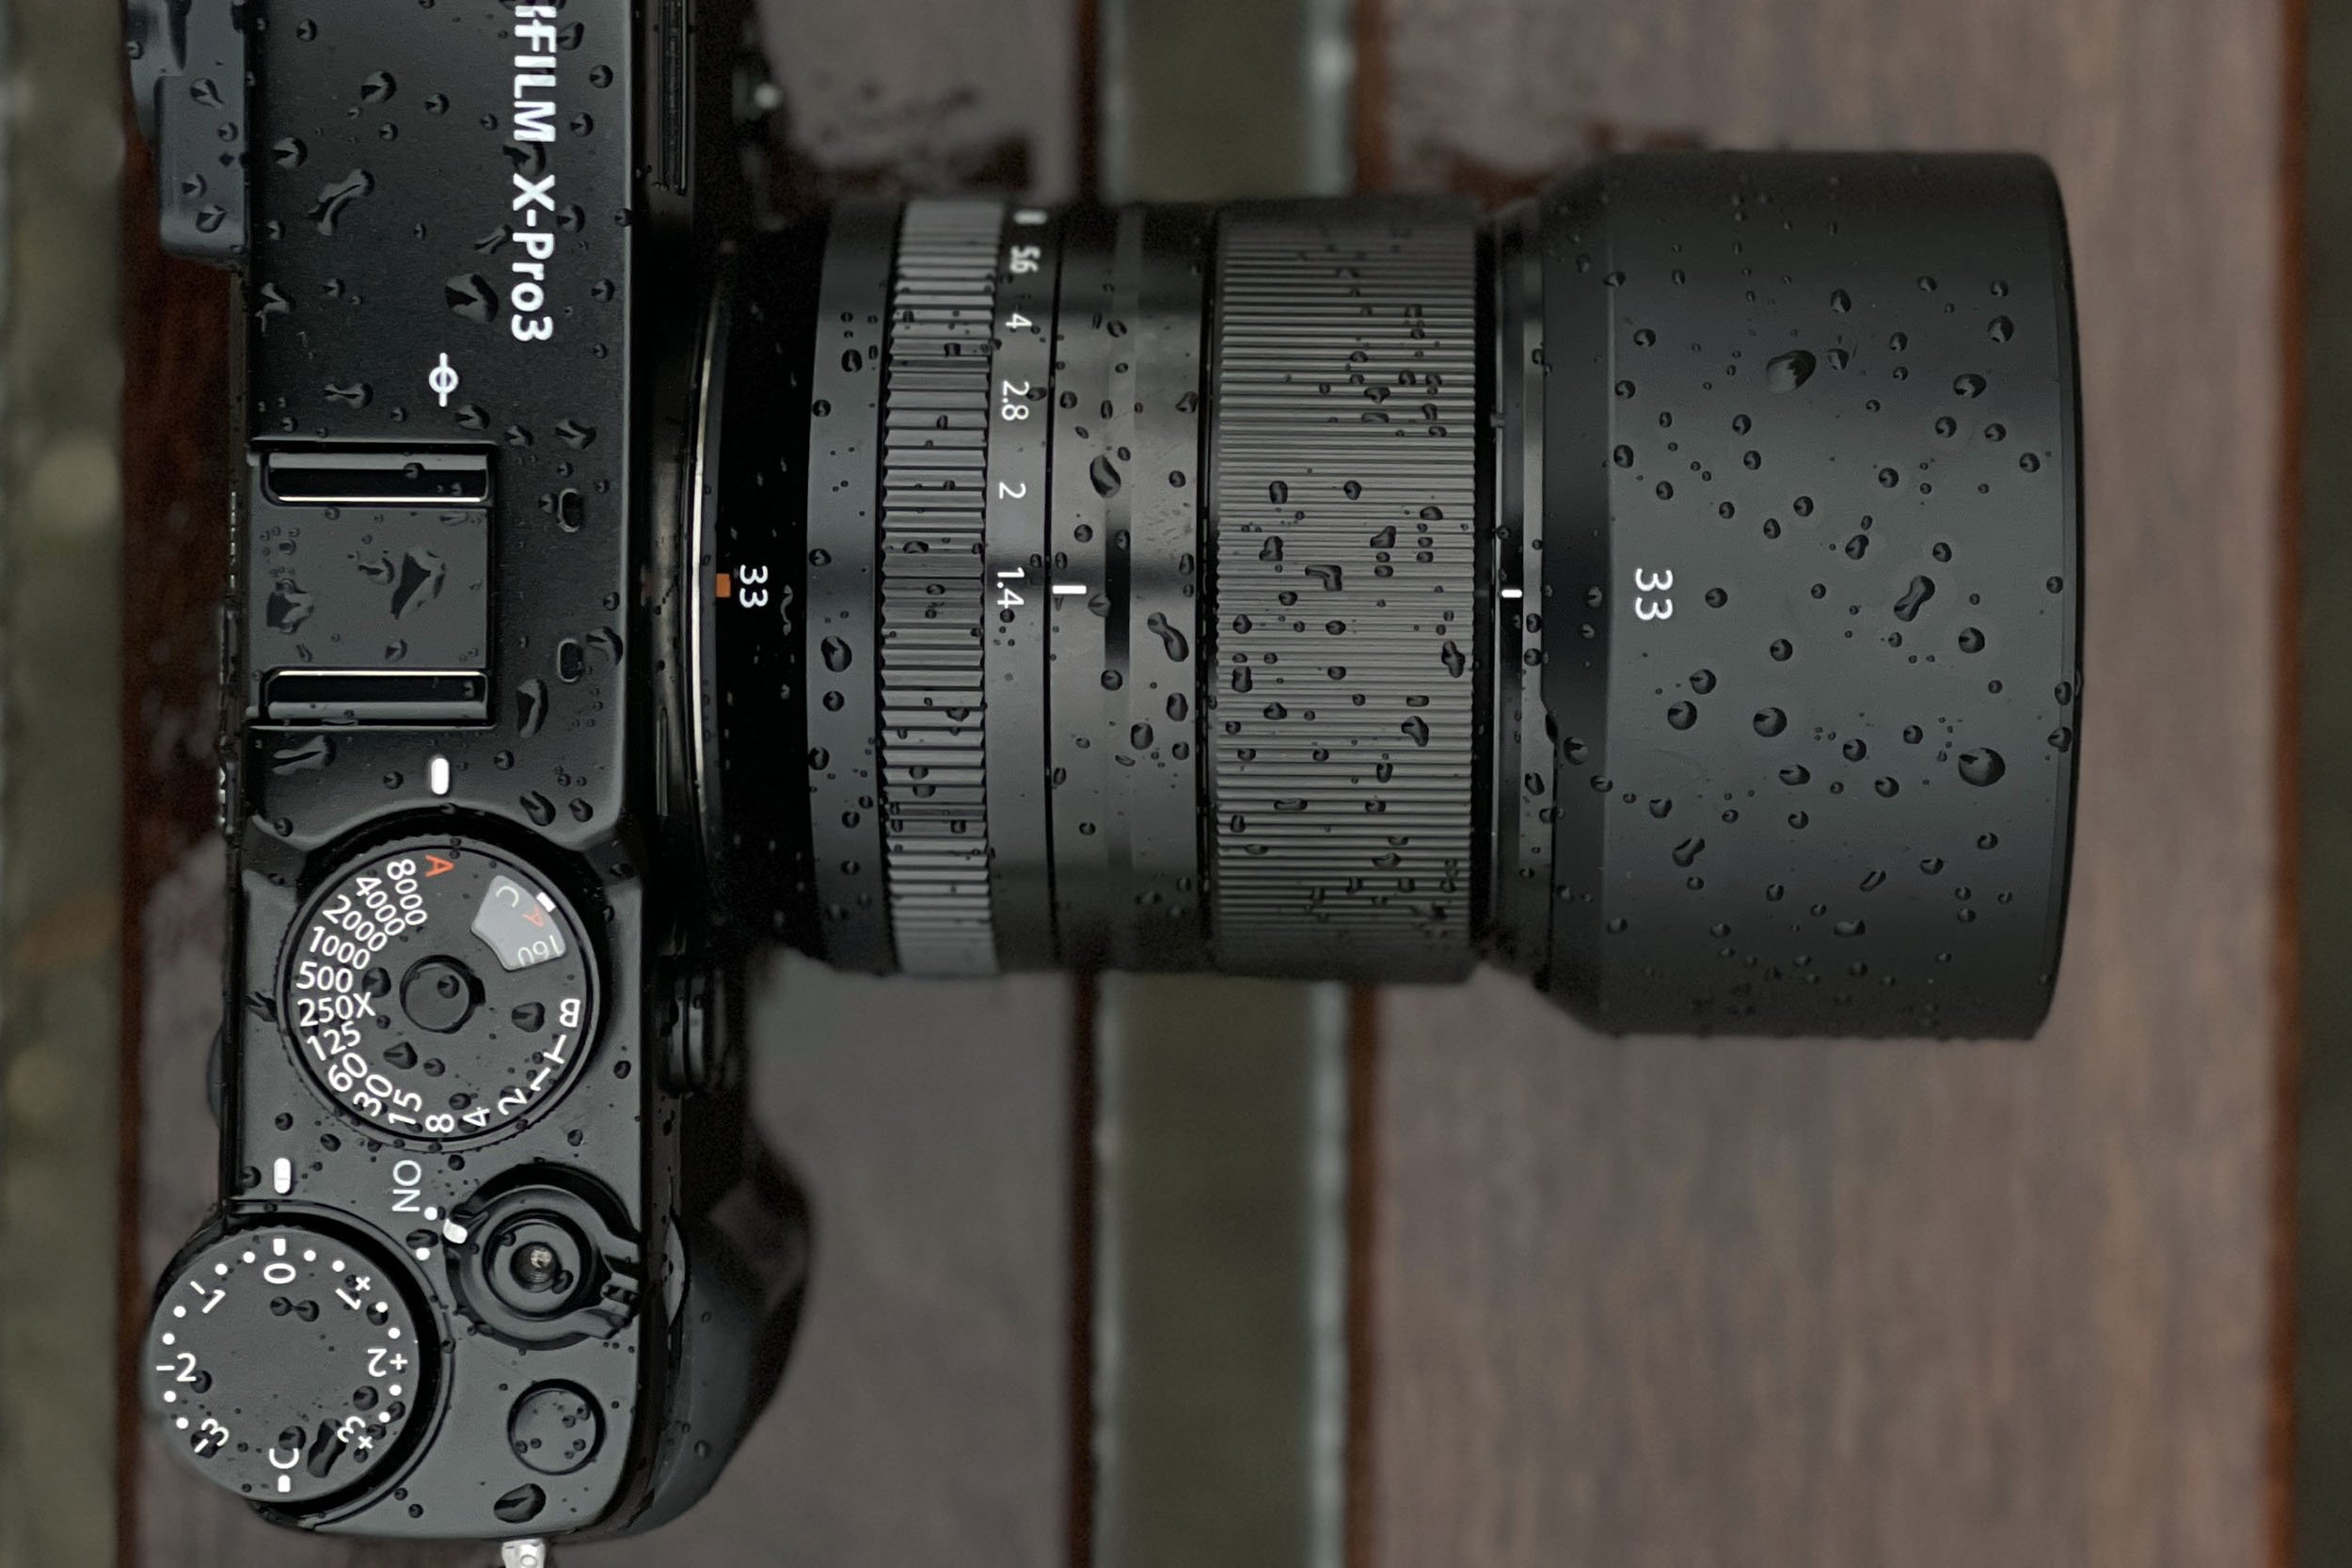 Heer oase Vertrappen Fujifilm XF 33mm f/1.4 R LM WR Review | 5050 Travelog